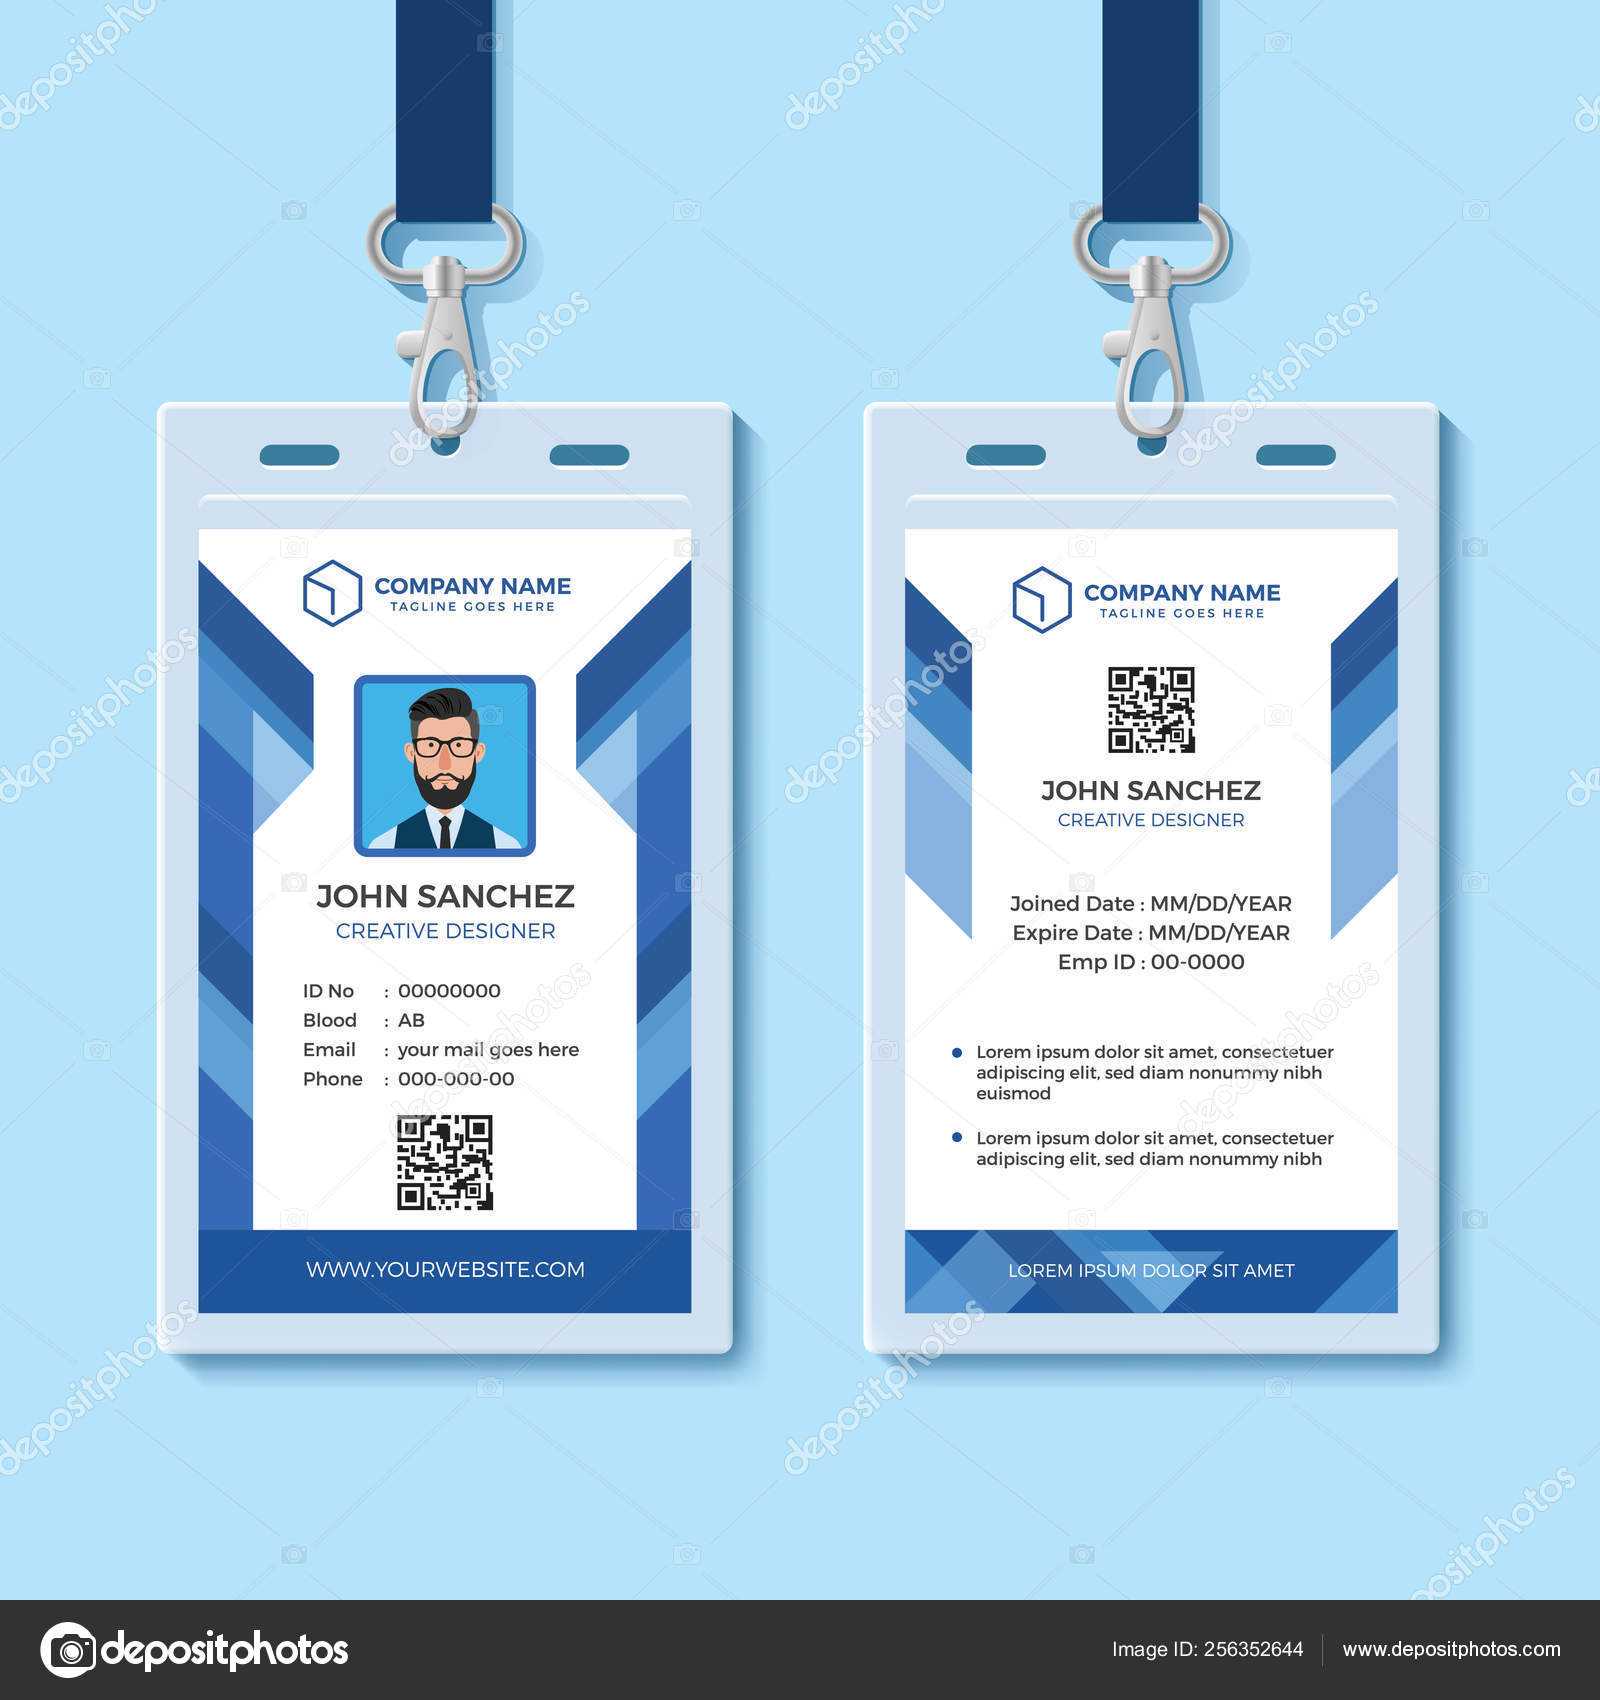 004 Depositphotos 256352644 Stock Illustration Blue Employee With Regard To Portrait Id Card Template